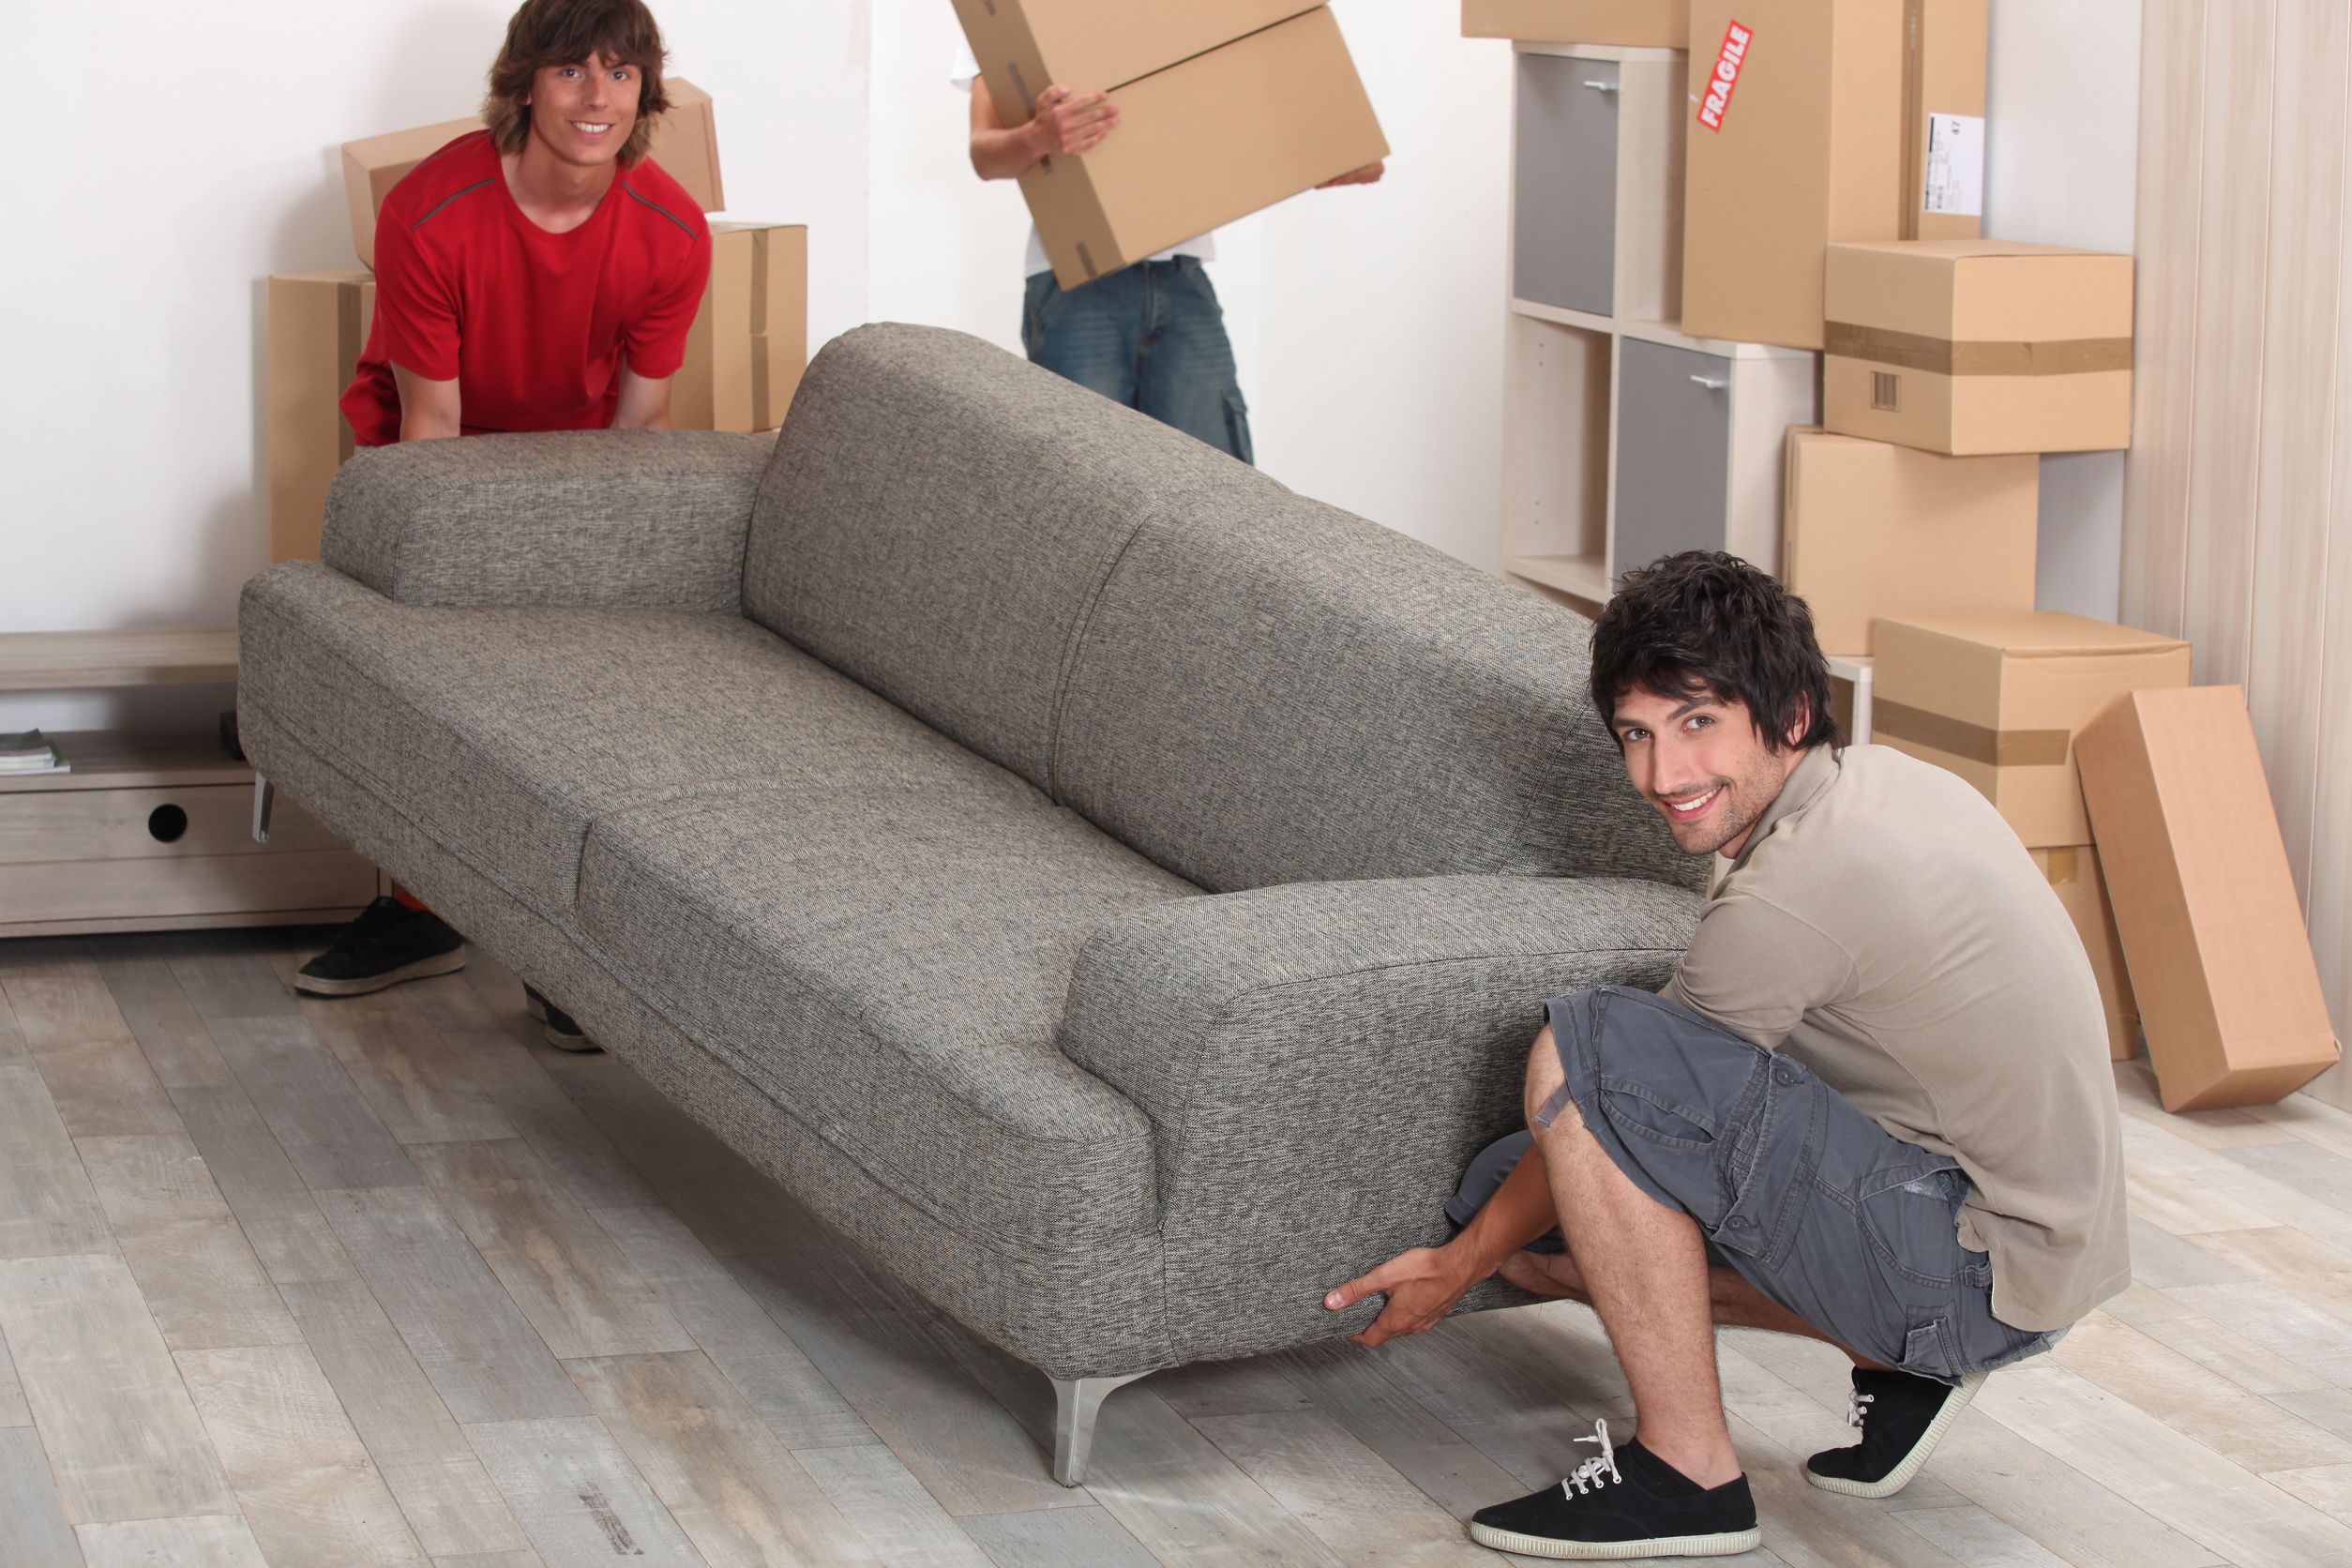 Experienced Commercial Long-Distance Movers in Fort Lauderdale, FL Are Ready to Assist You